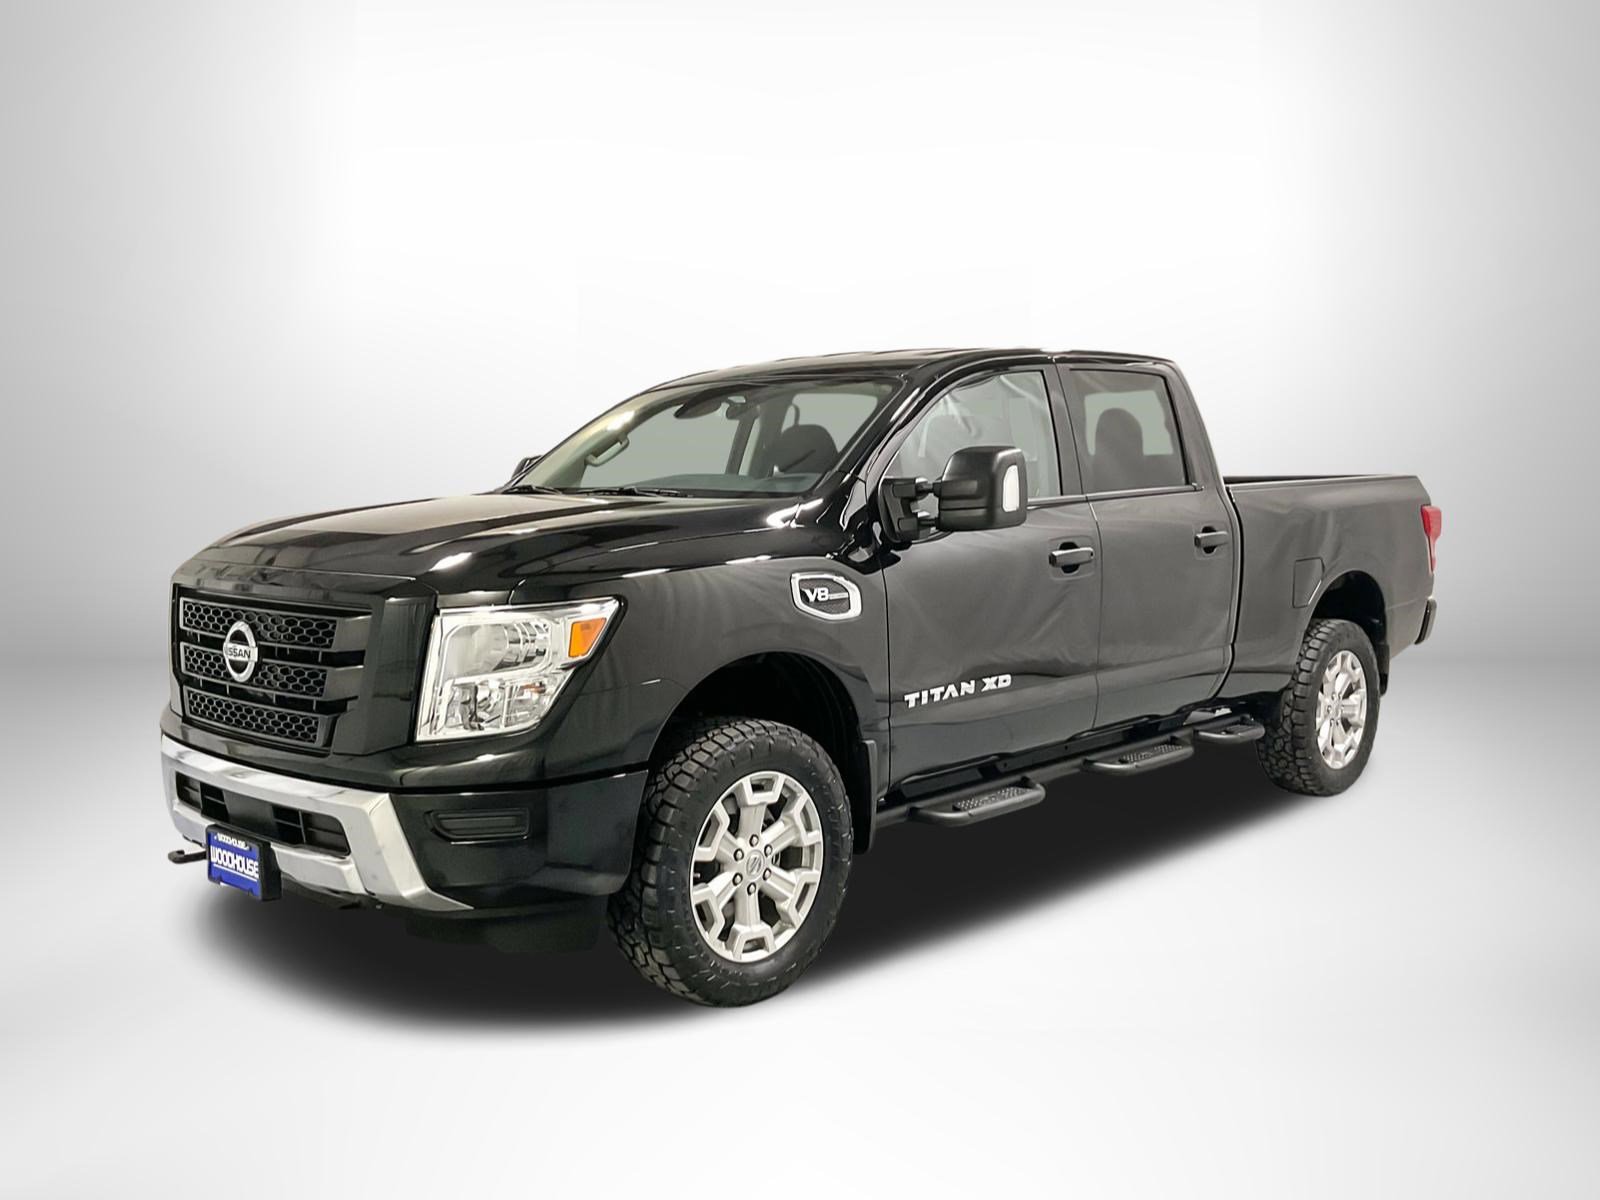 Certified Pre-Owned 2022 Nissan Titan XD SV Crew Cab in Bellevue #W3450 |  Woodhouse Nissan